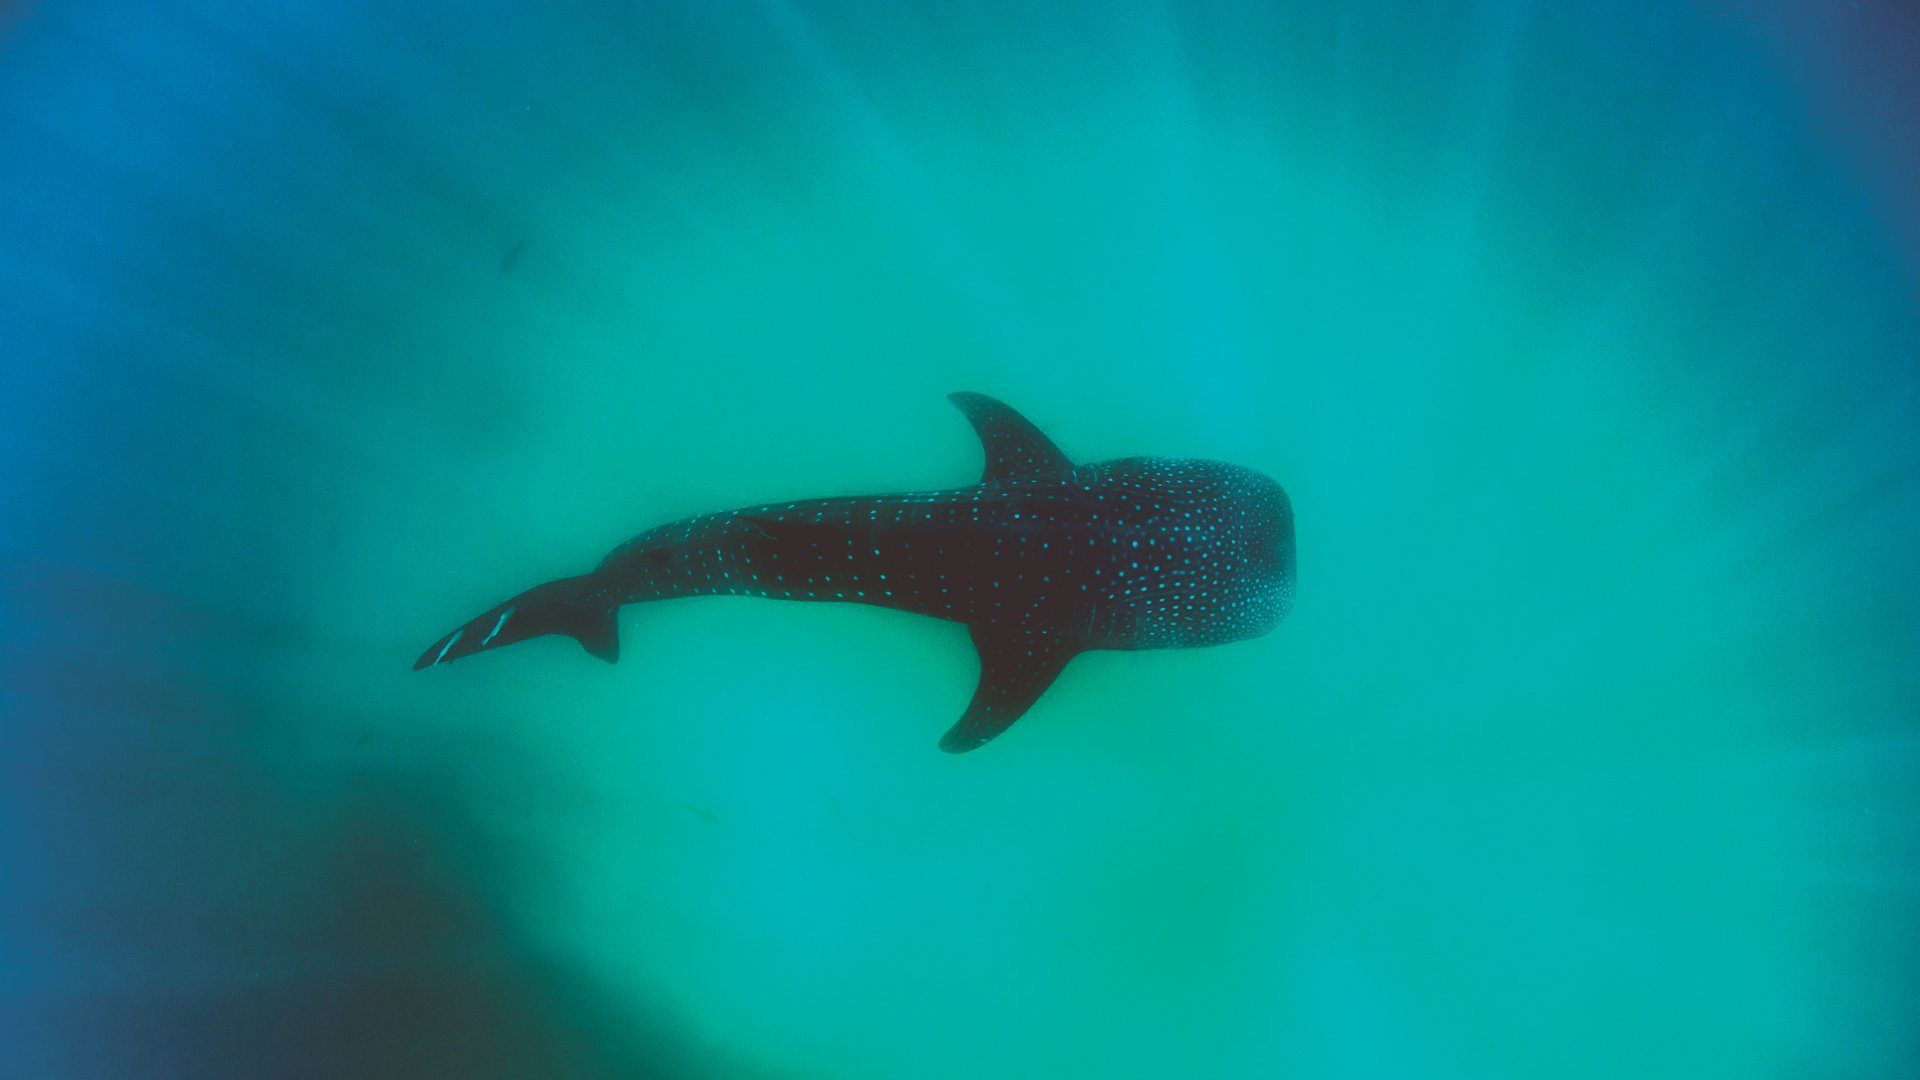 Whale sharks can live over a century if not killed by poachers.